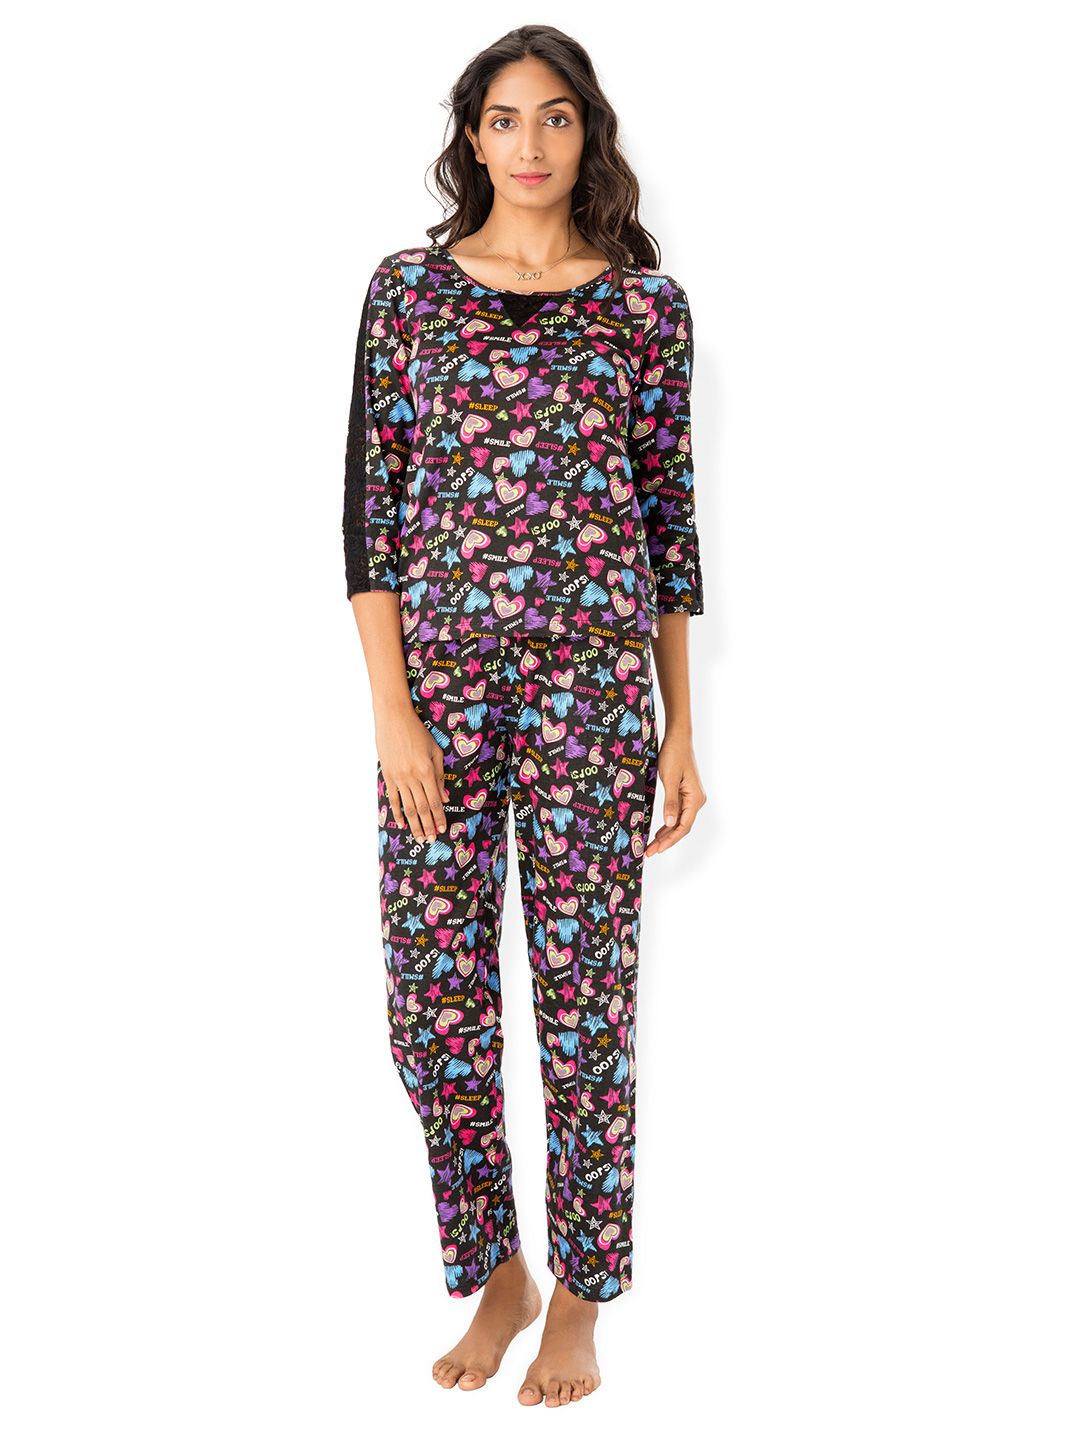 Buy PrettySecrets Cotton Pajamas - Black Online at Best Prices in India ...